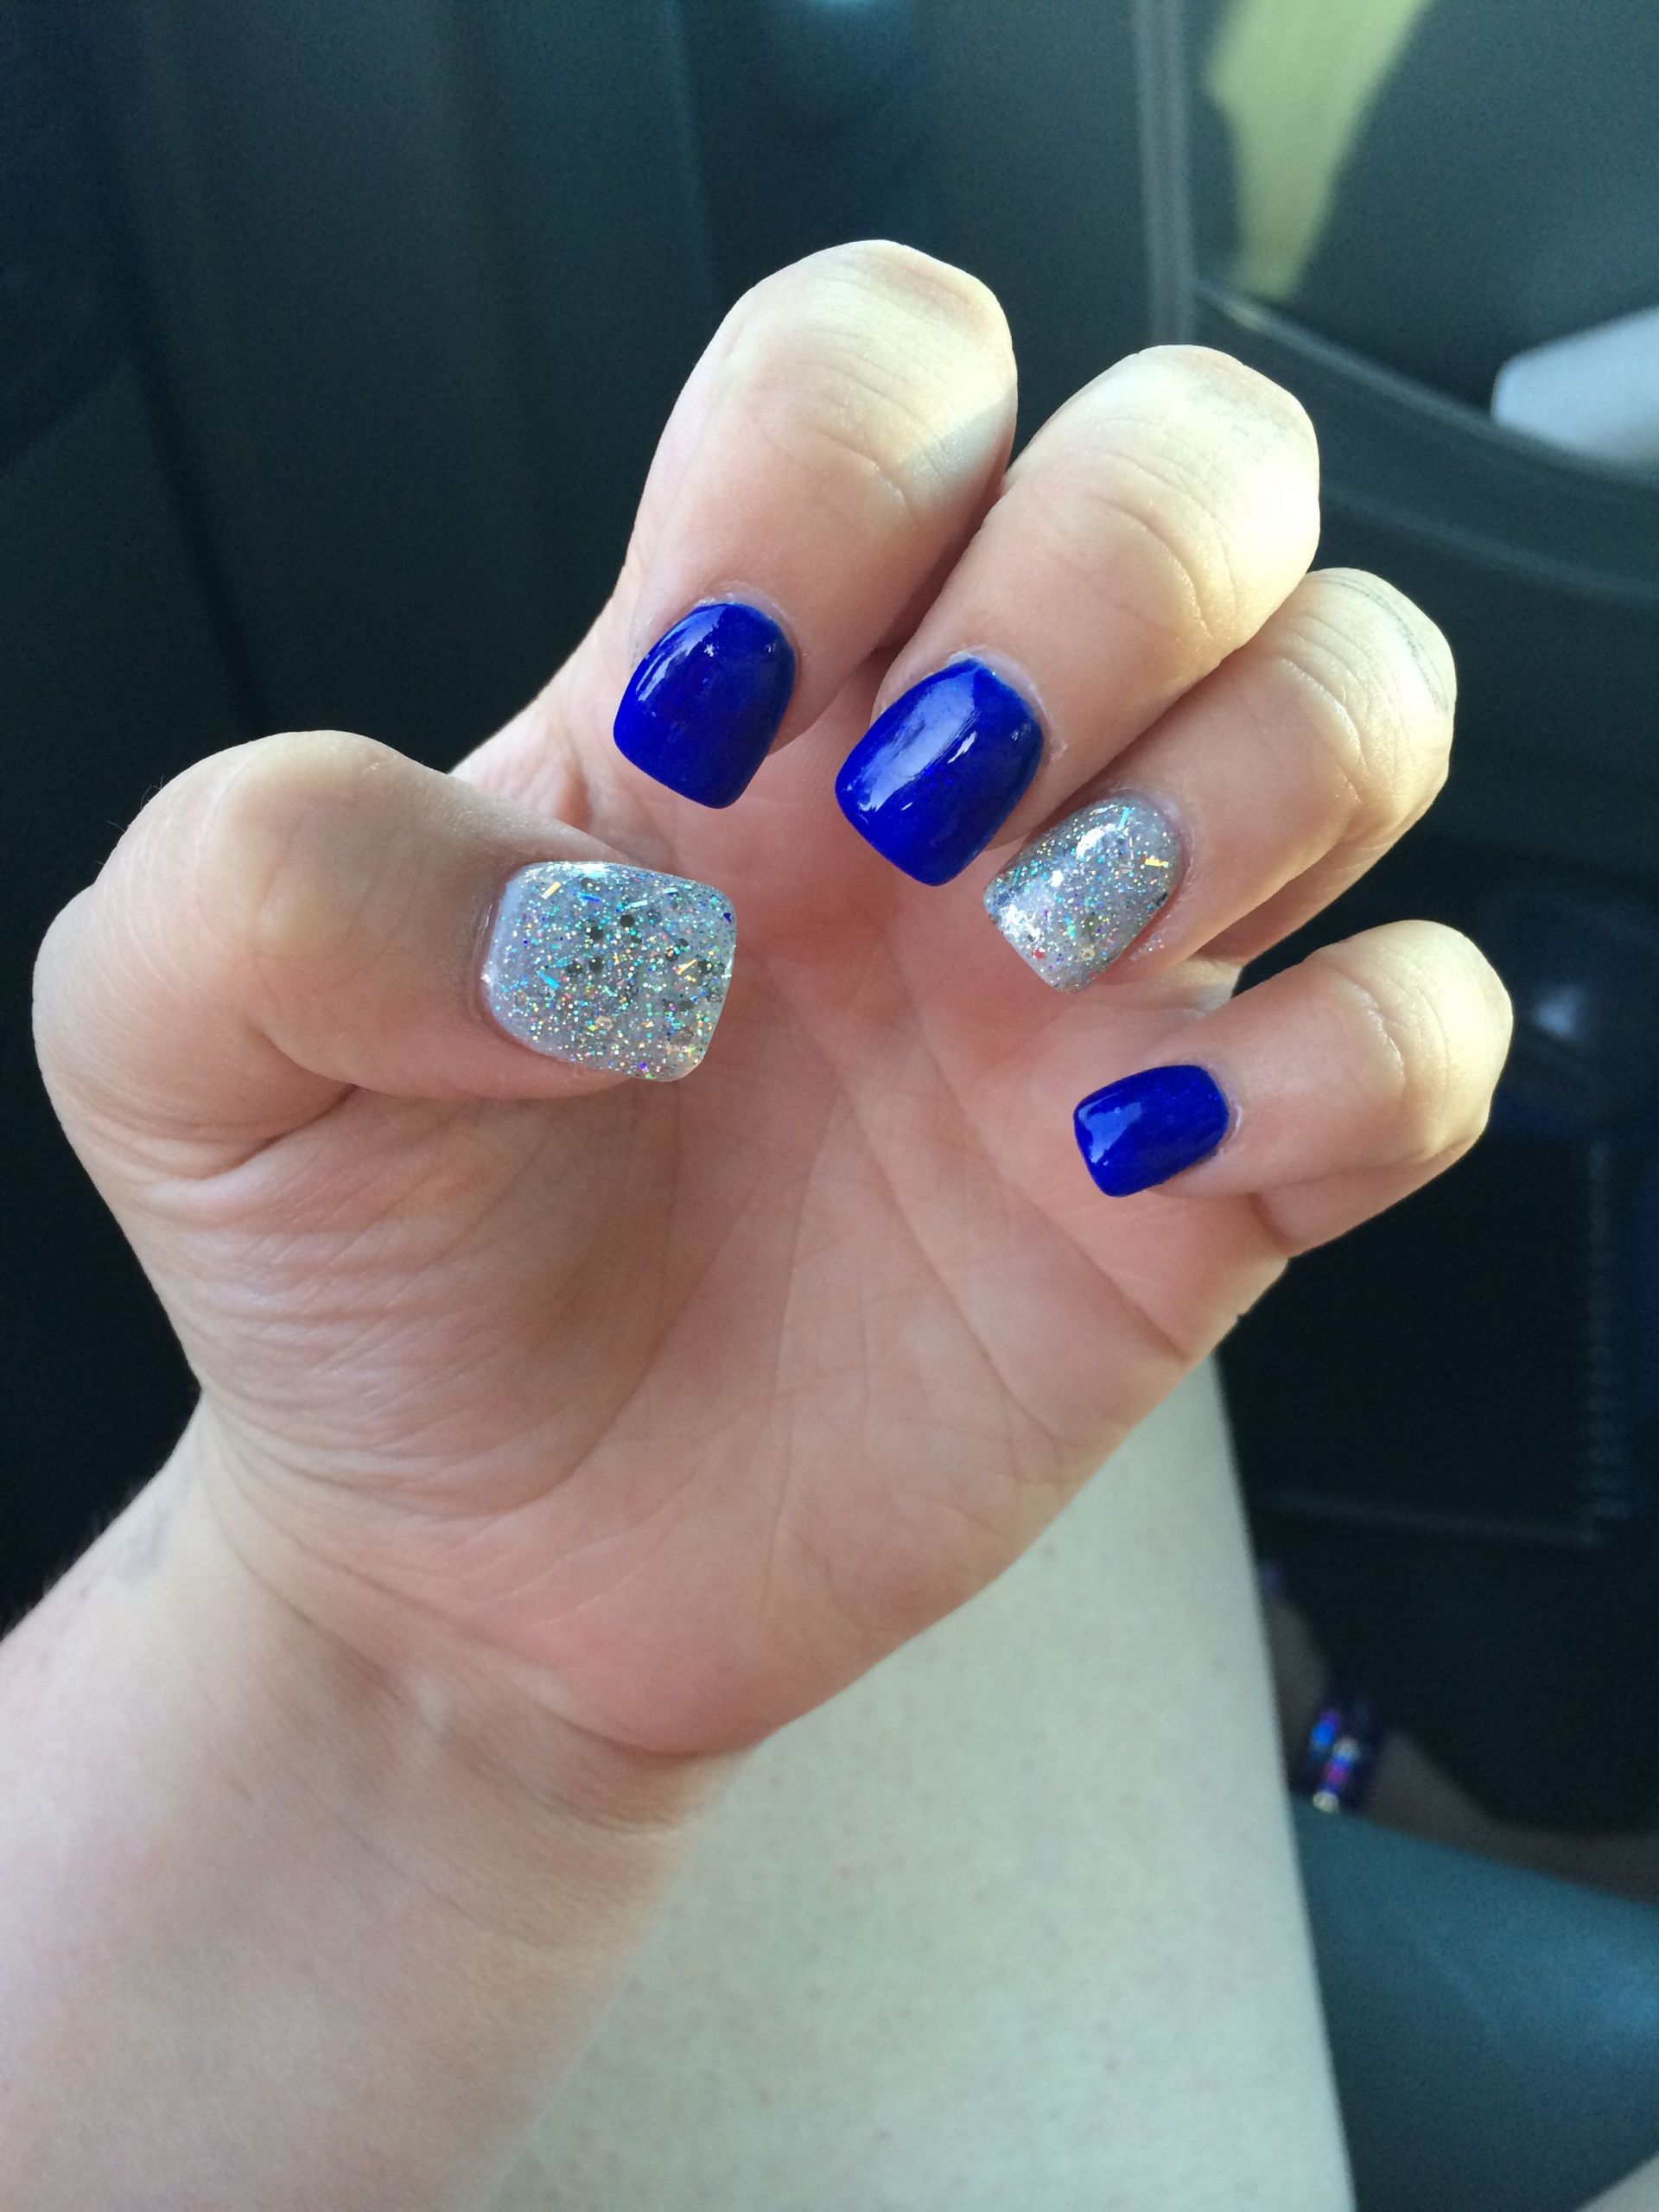 Royal Blue Glitter Nails
 Royal blue with silver glitter nails in 2019